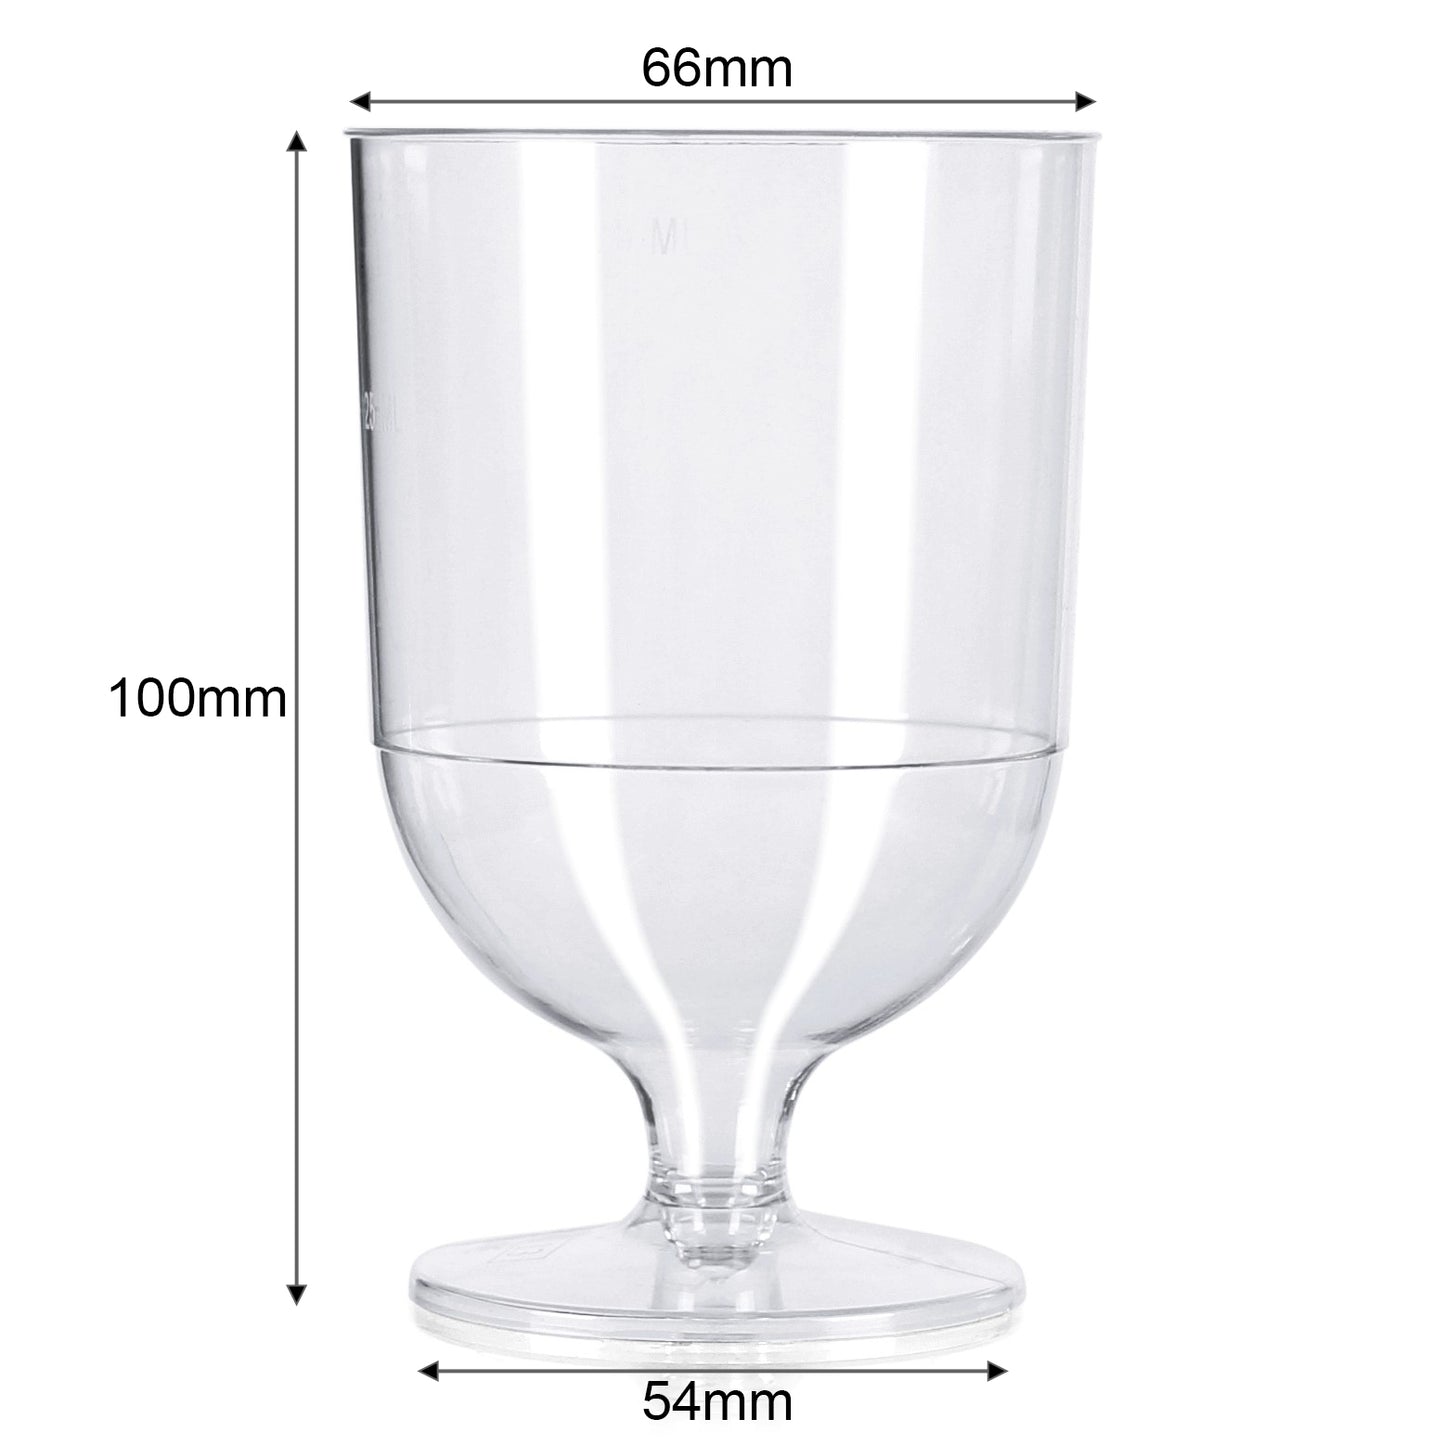 150 Pack x Clear Disposable Wine Glasses - CE Marked at 125ml 175ml - One Piece - Plastic - For Parties, BBQs, Festivals